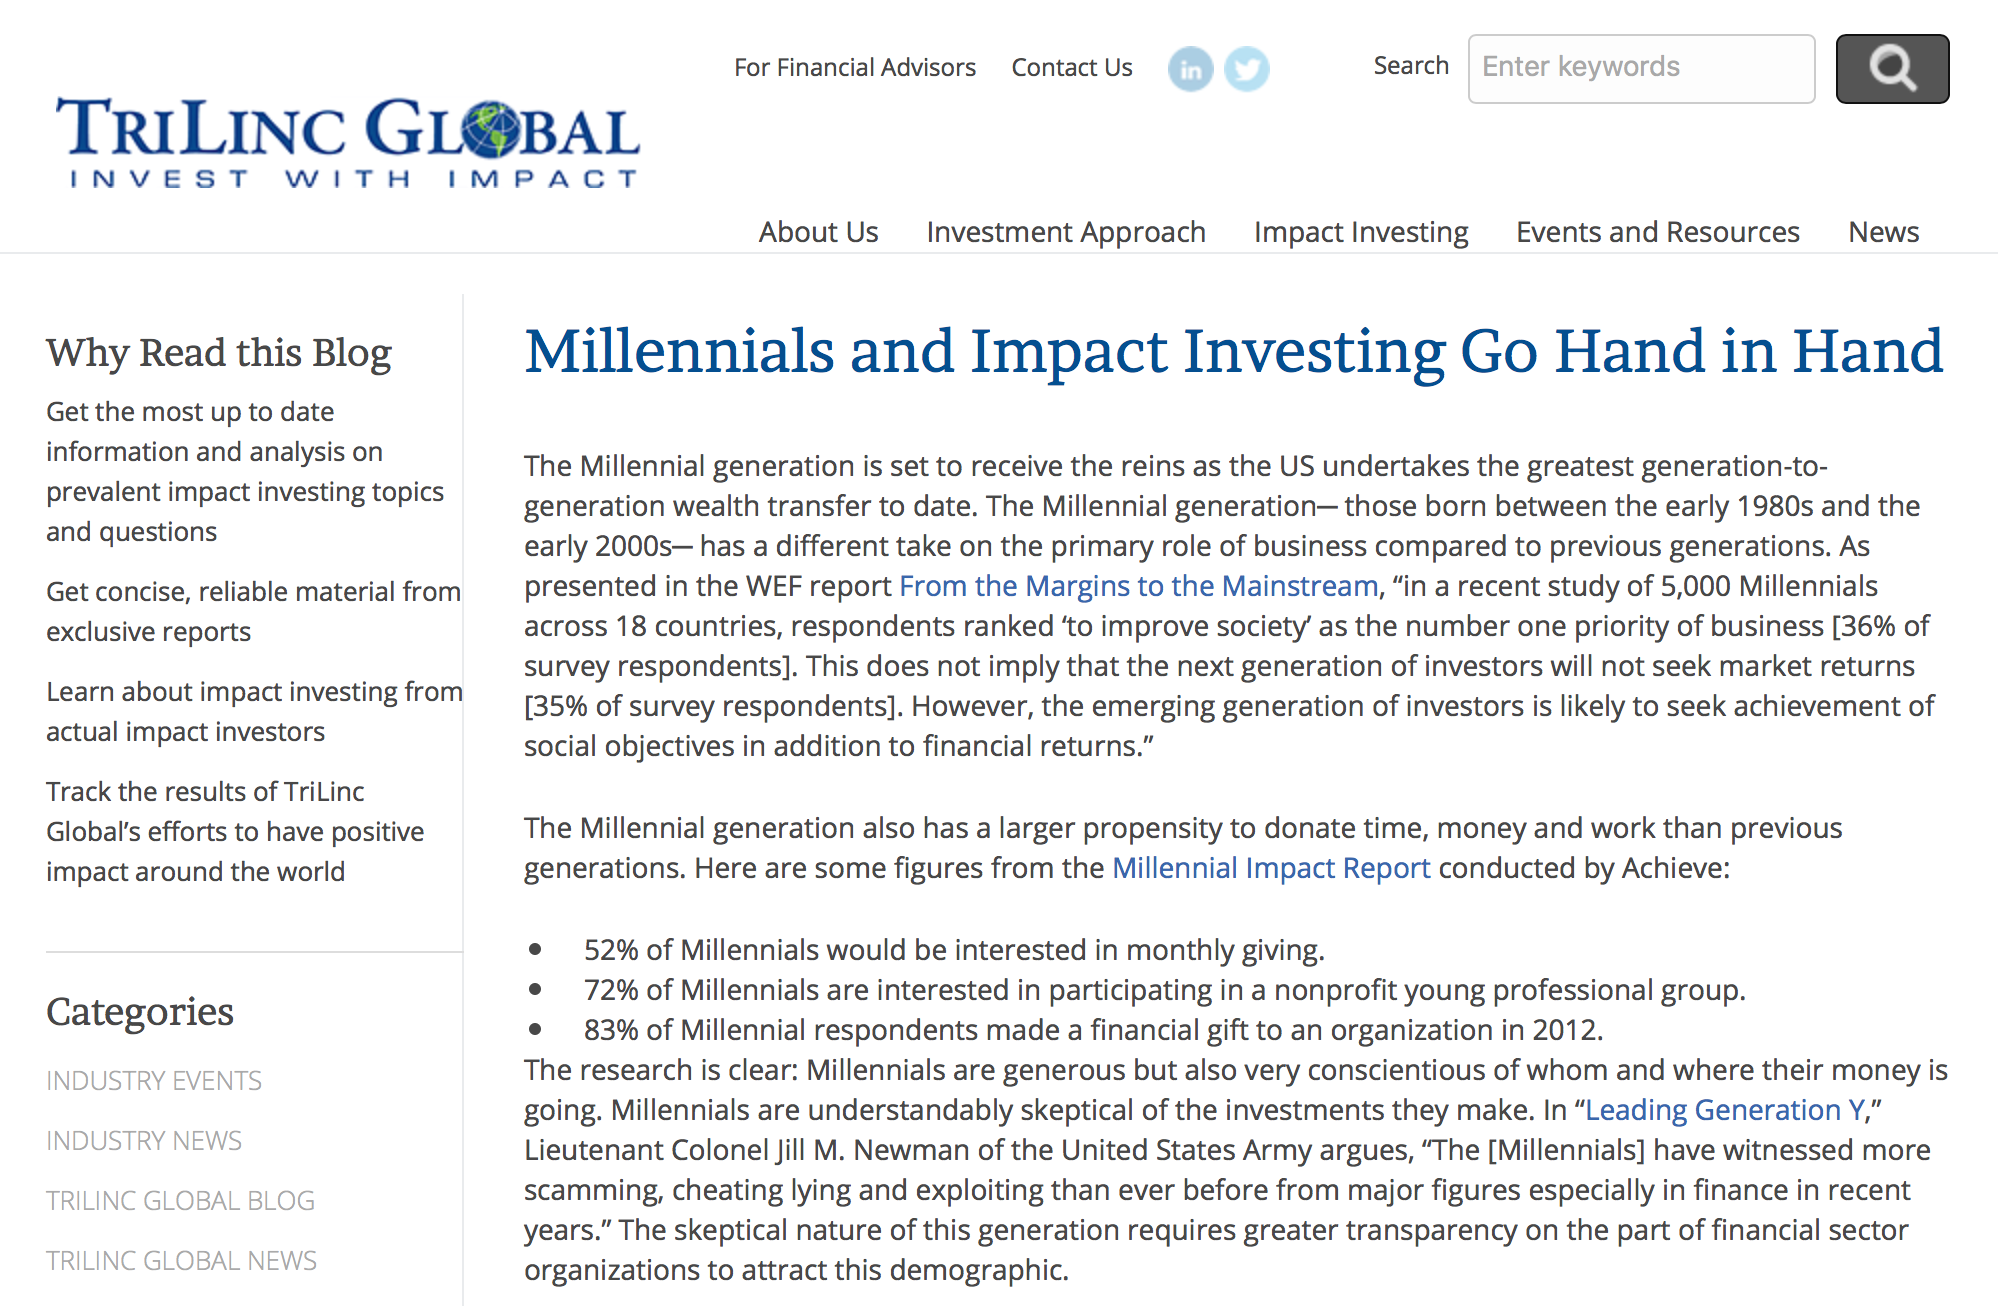 Millennials and Impact Investing Go Hand in Hand